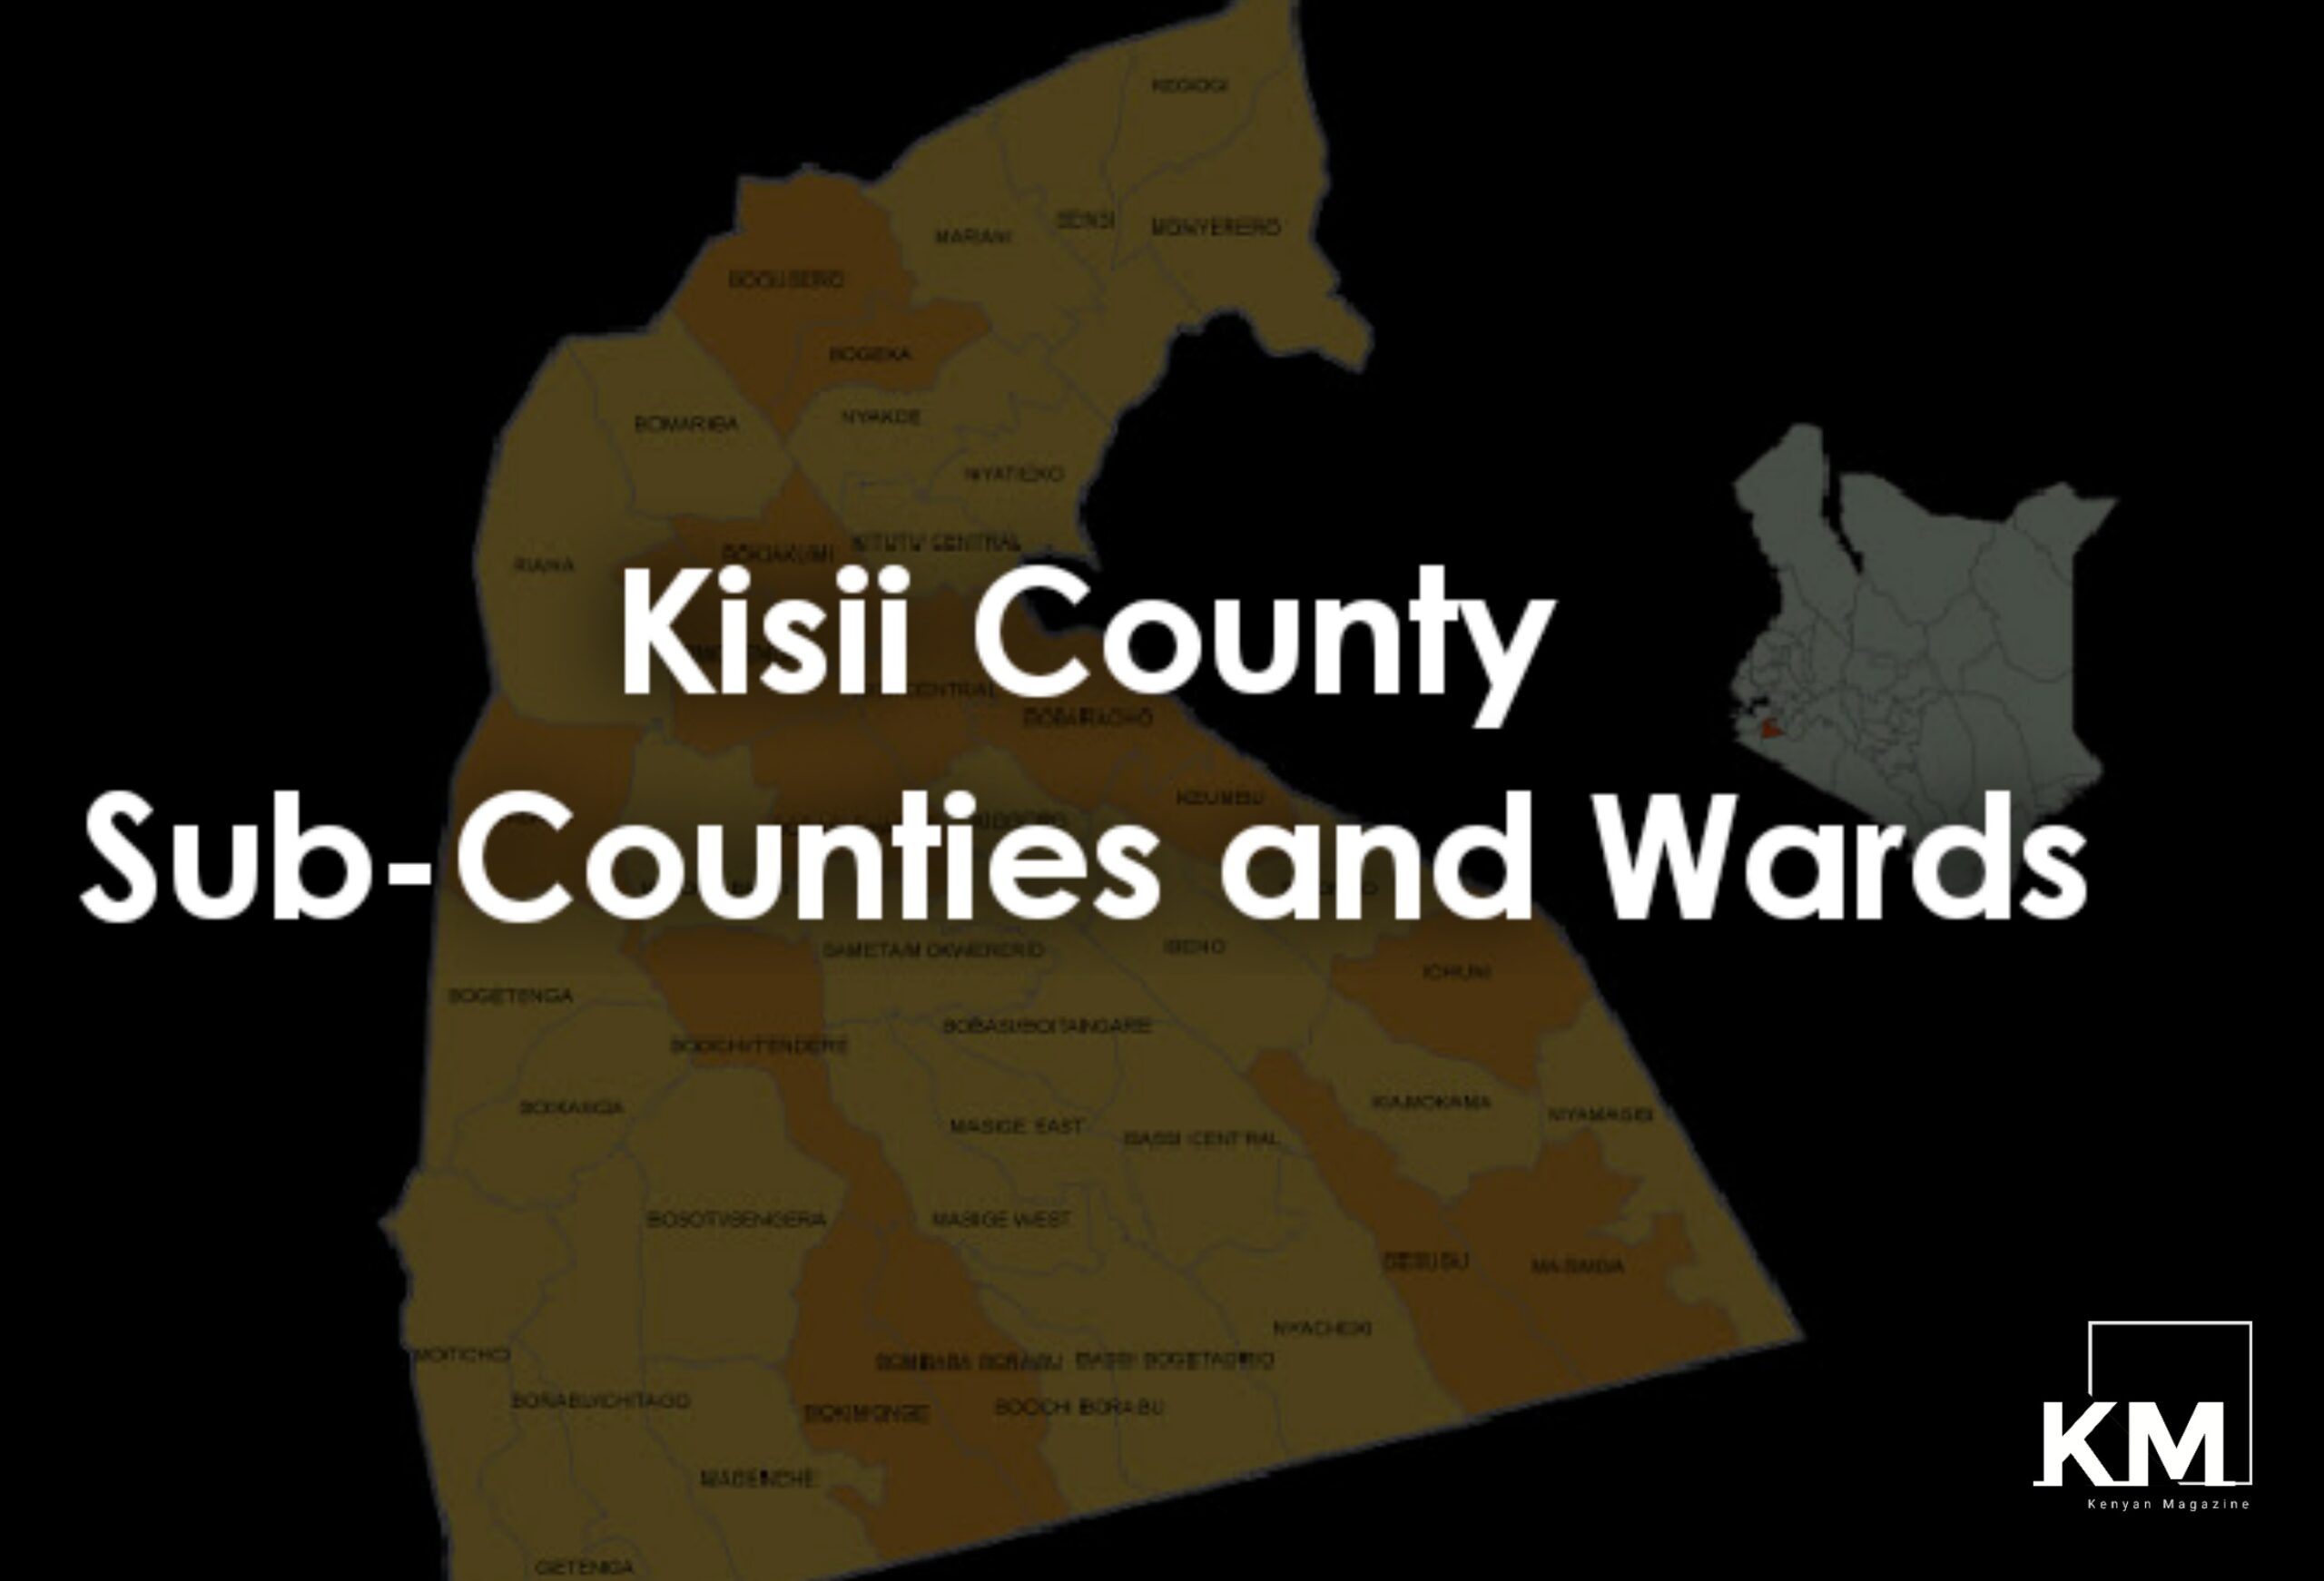 Kisii County Sub-Counties and wards